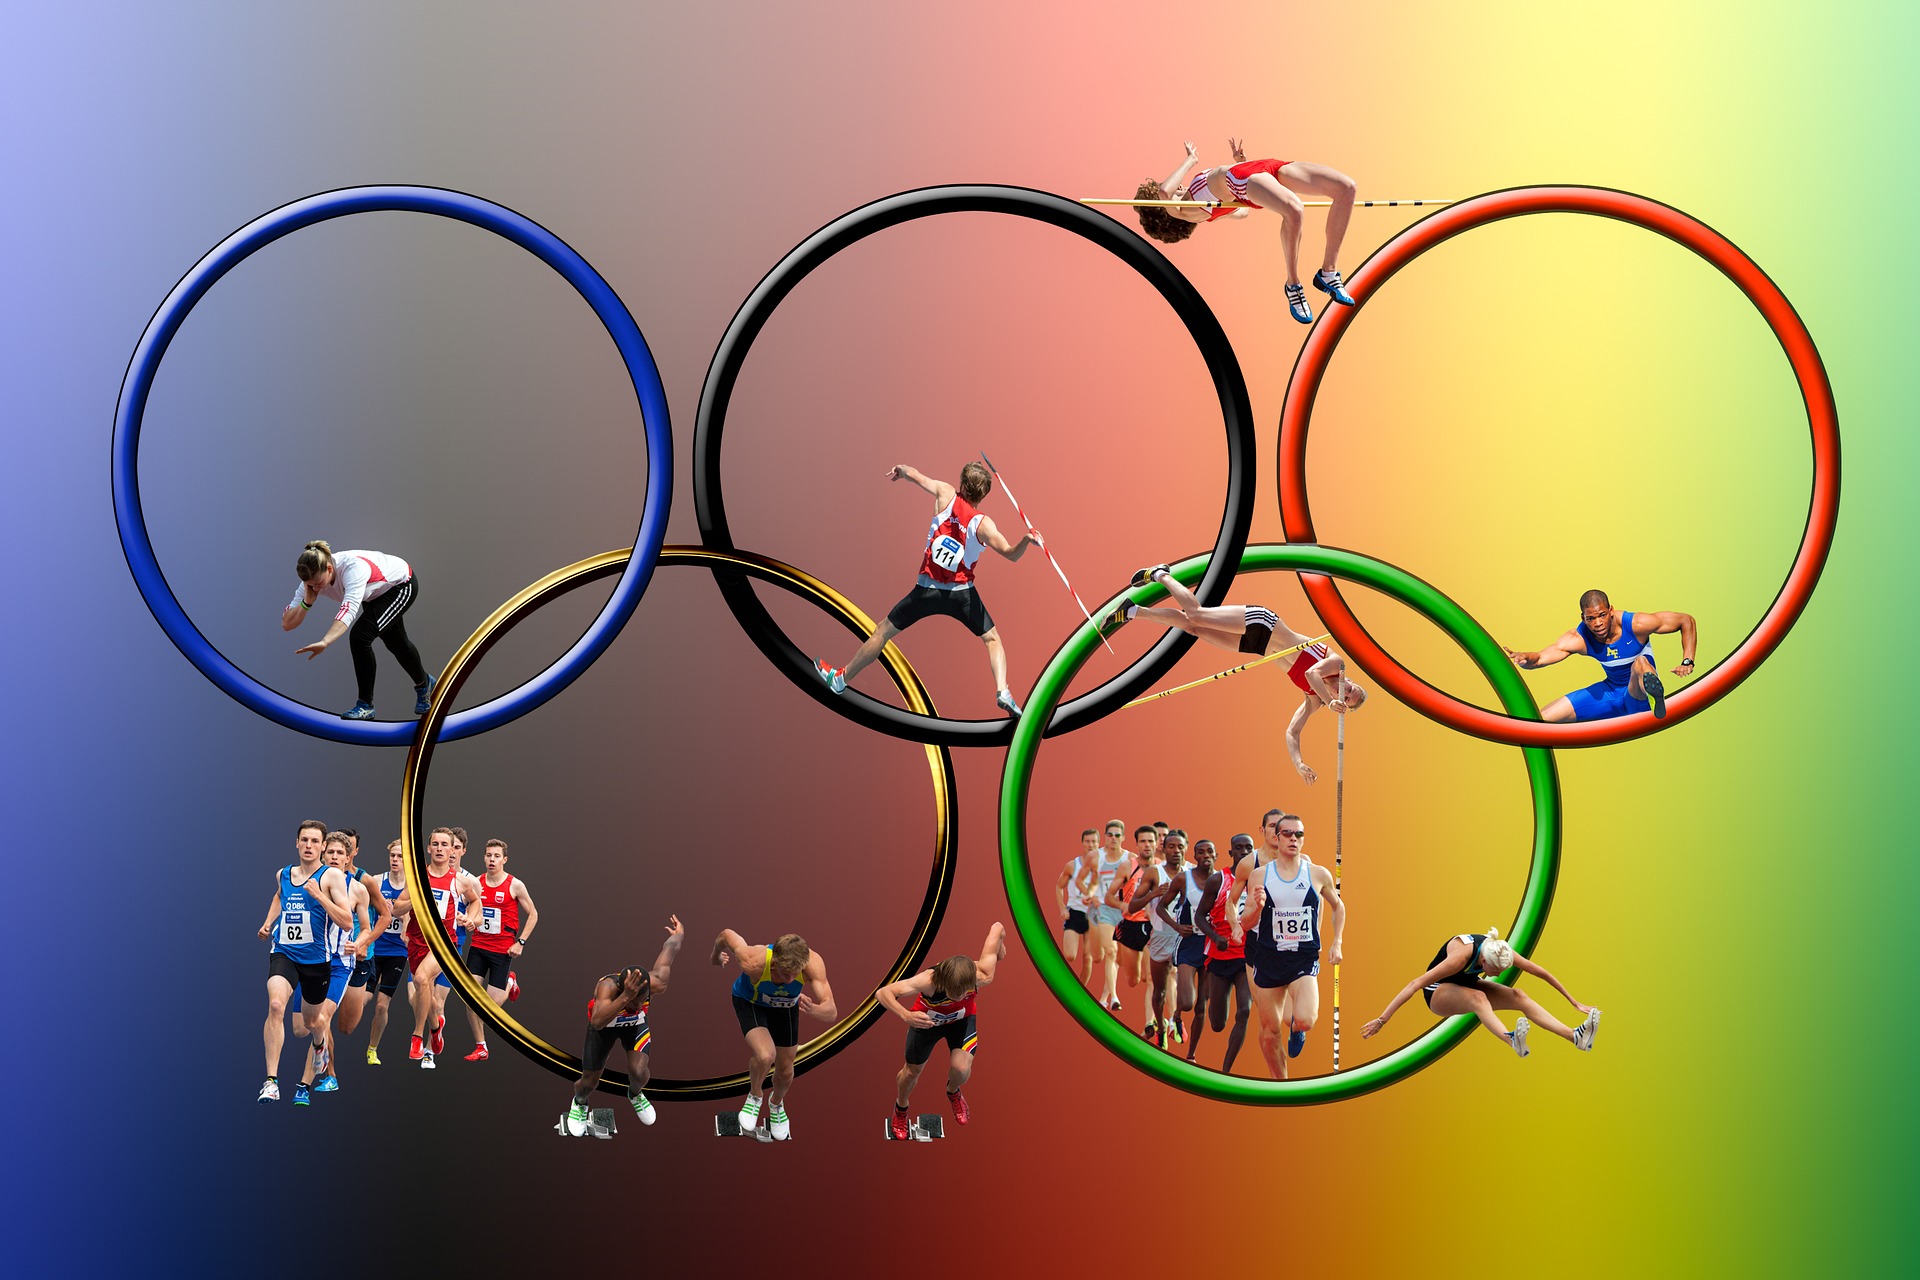 Olympics Image By Gerhard G. From Pixabay  